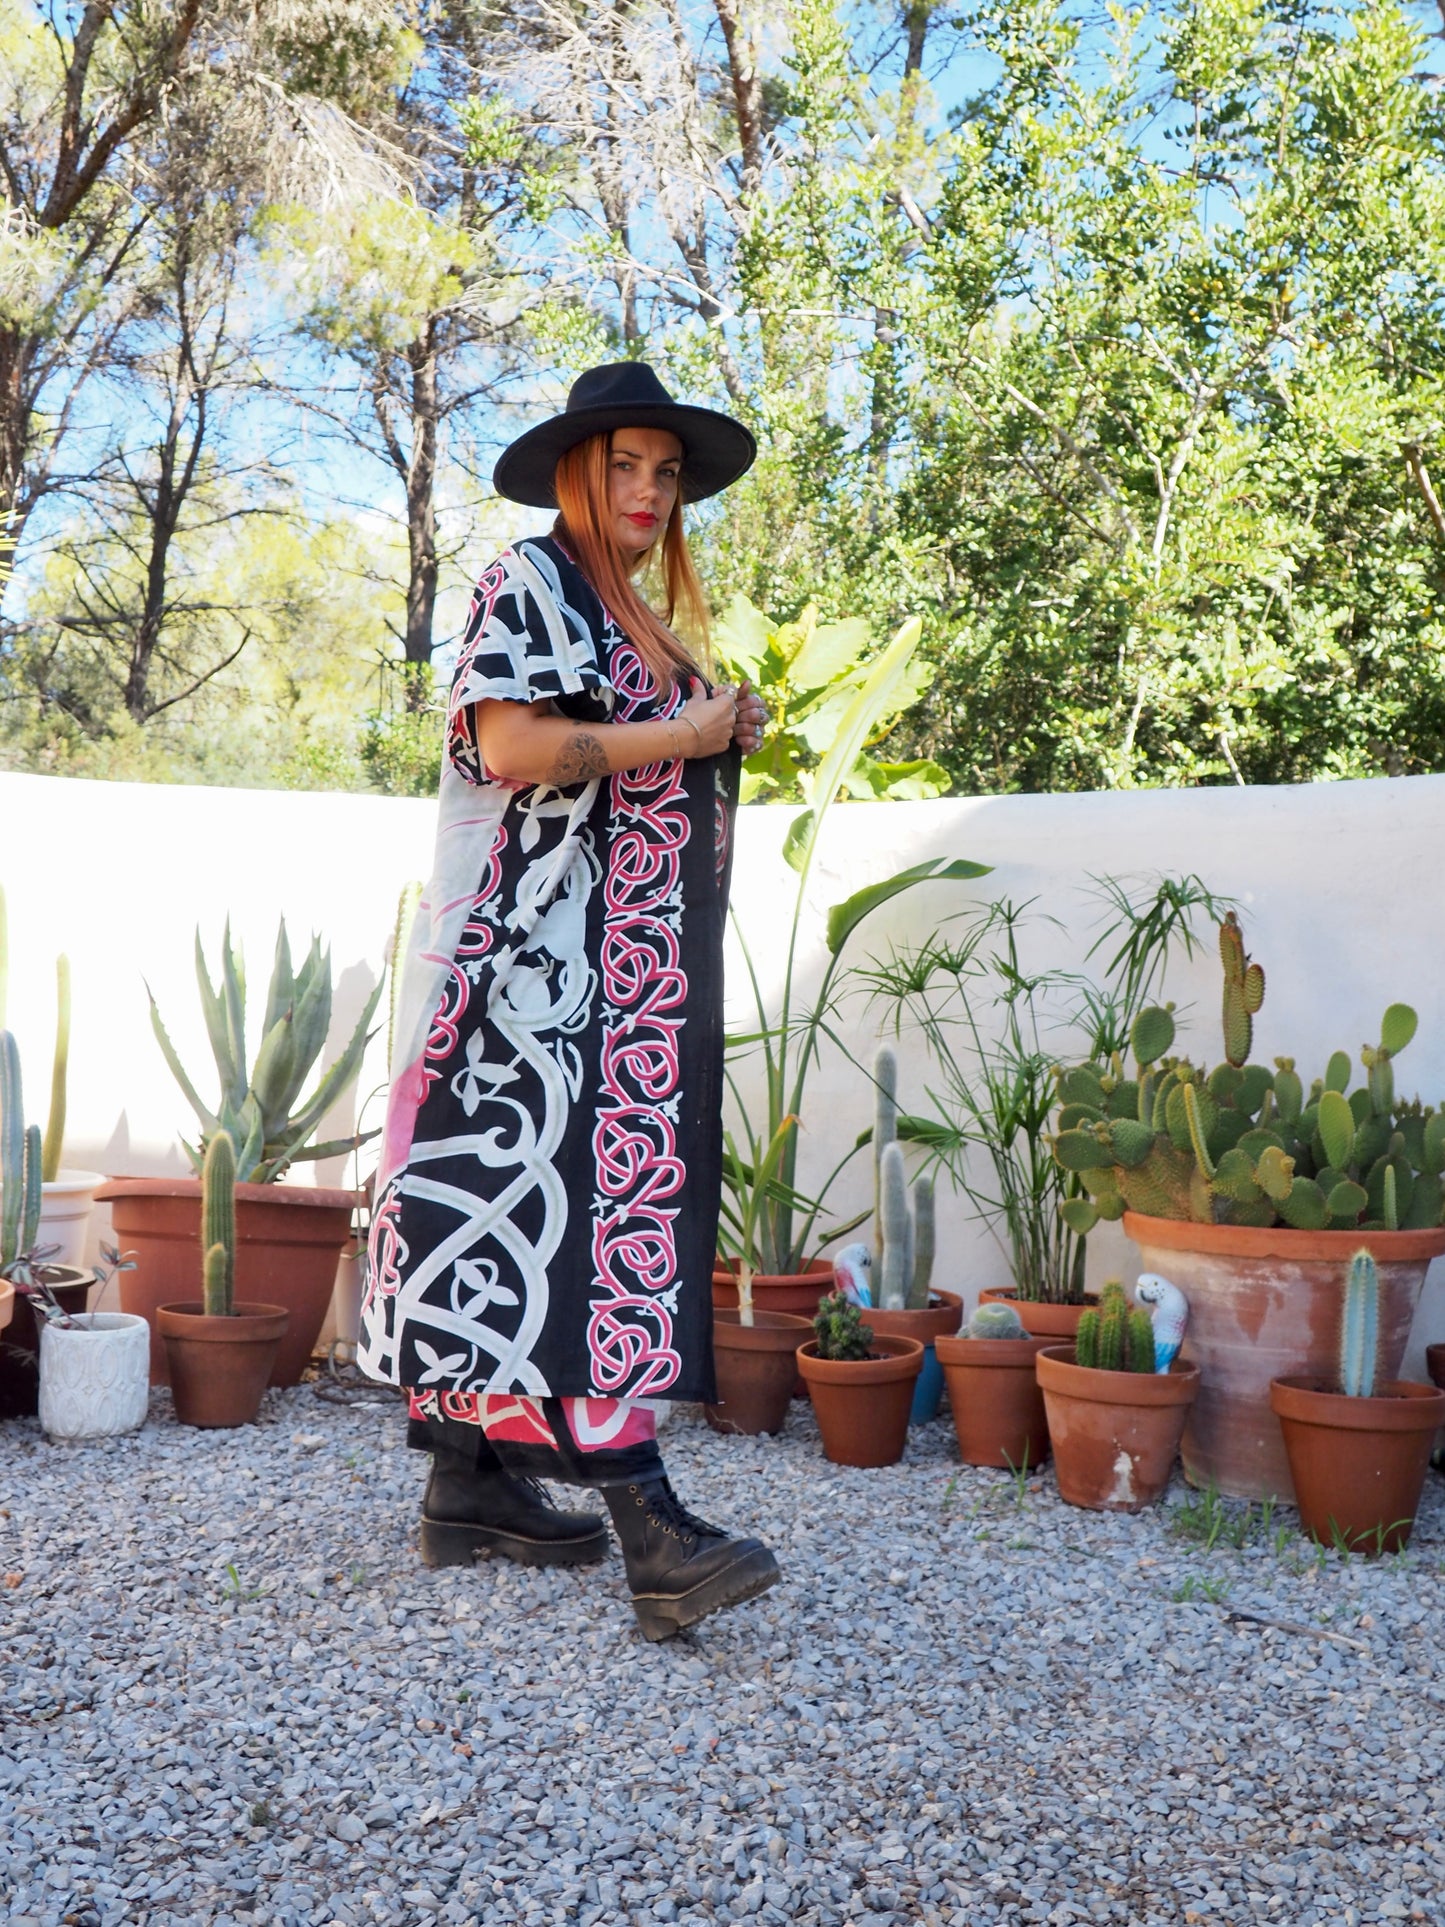 Long oversized waistcoat jacket up-cycled by Vagabond Ibiza from screen printed cotton textiles super cool.